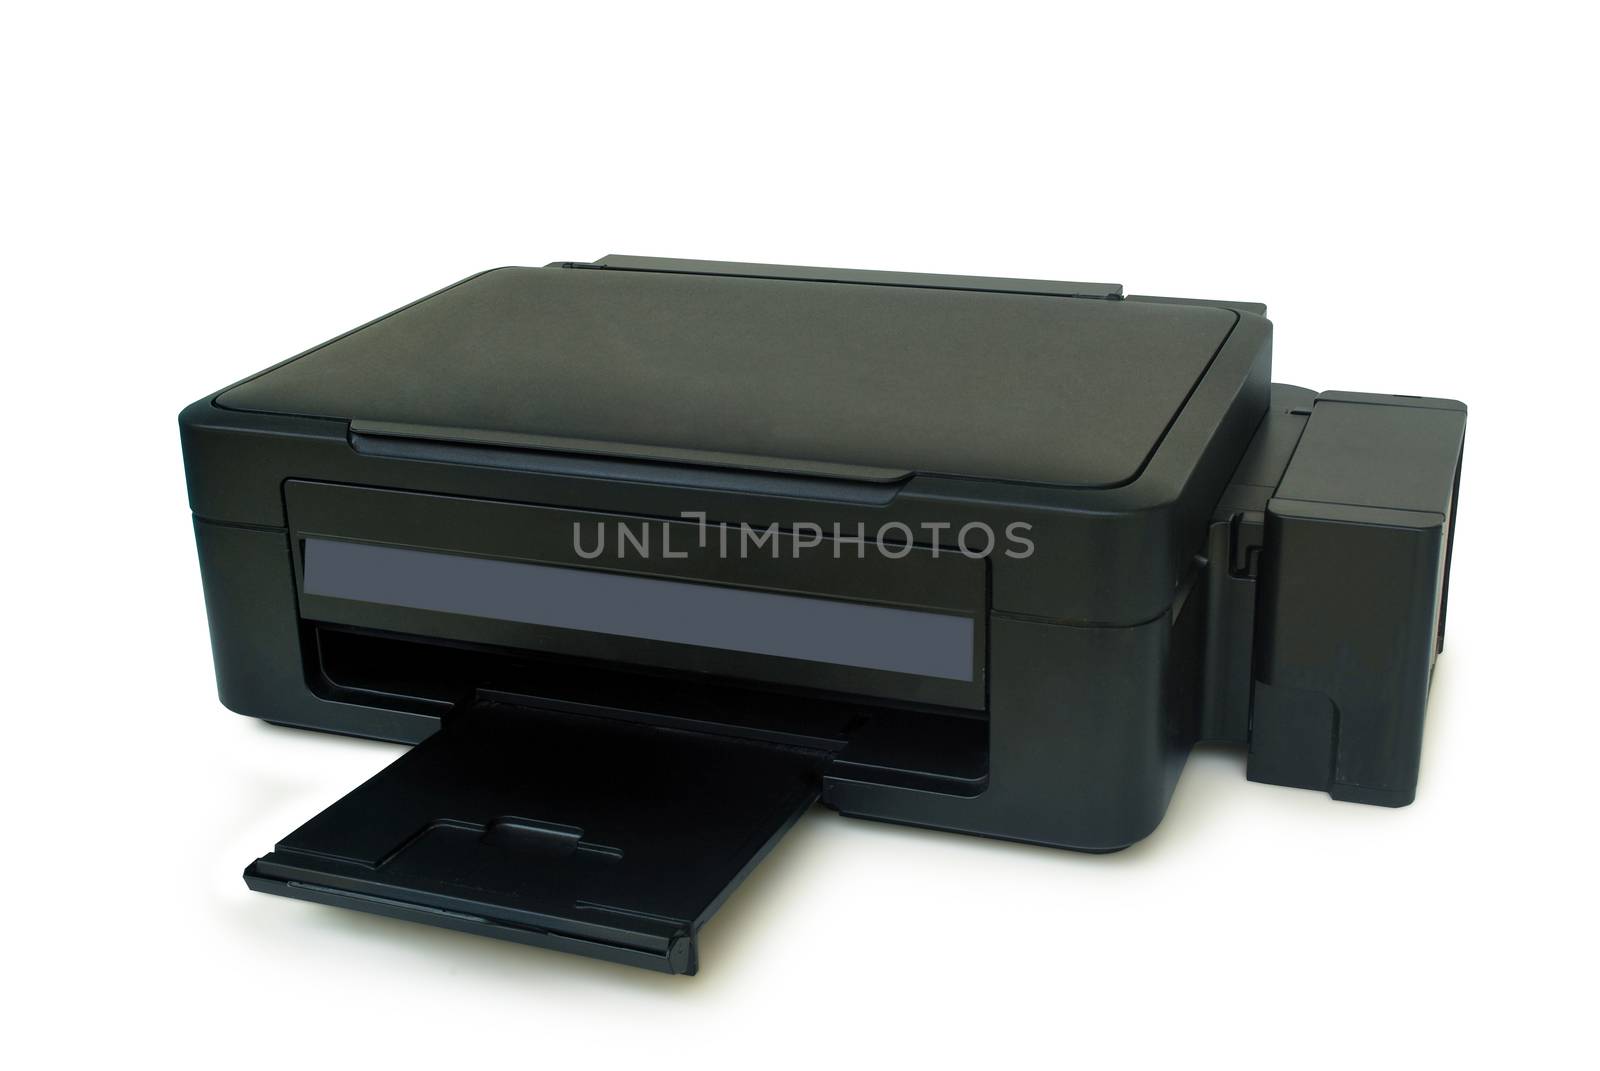 Four color printer on white background.With Clipping Path.